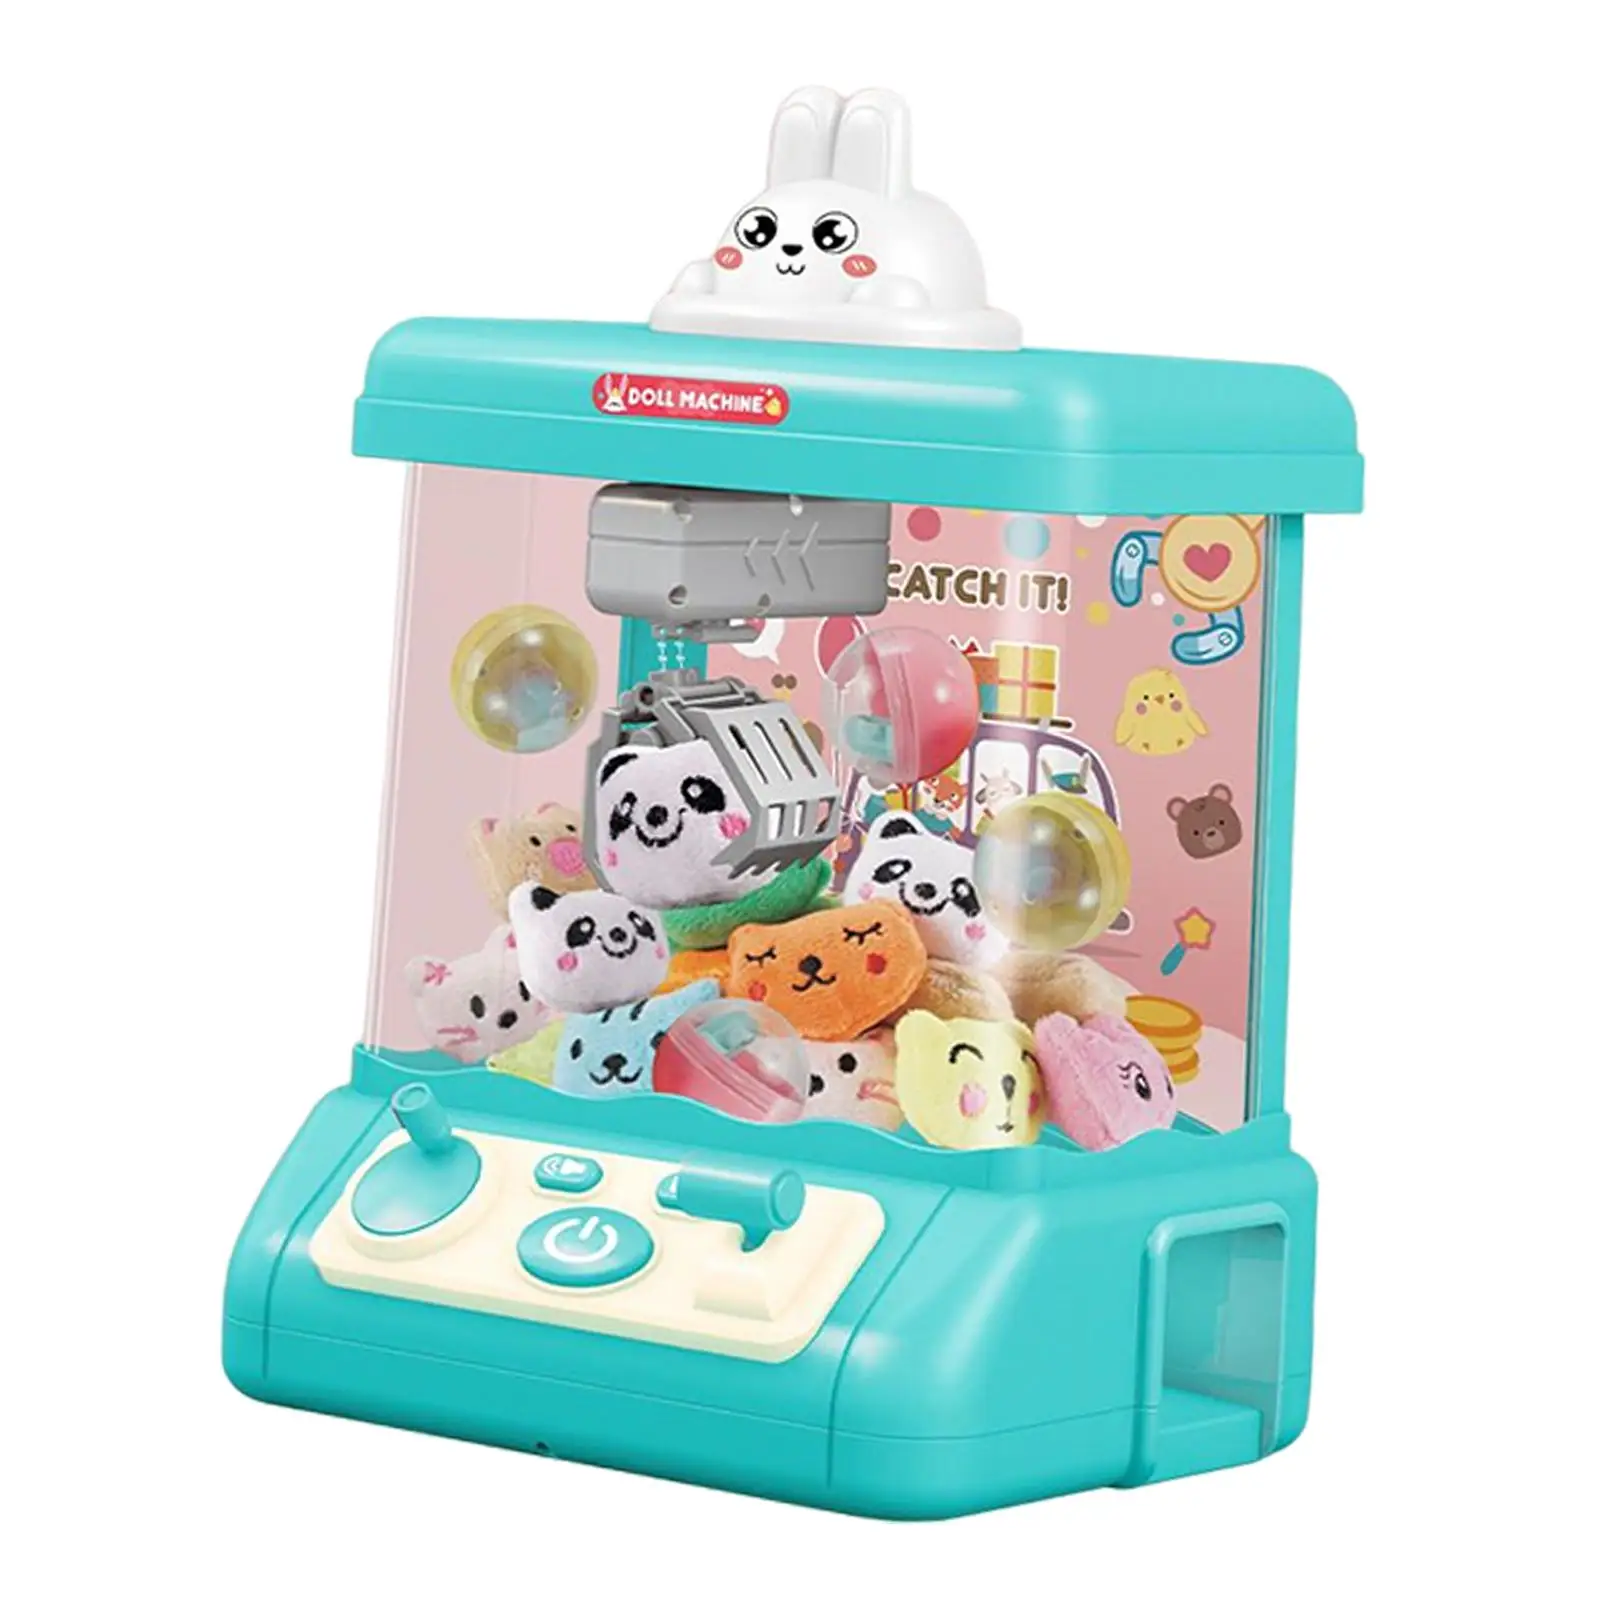 Household Claw Machine with Lights and Sound Miniature DIY Catching Doll Machine Claw Toy Grabber Machine for Birthday Gifts